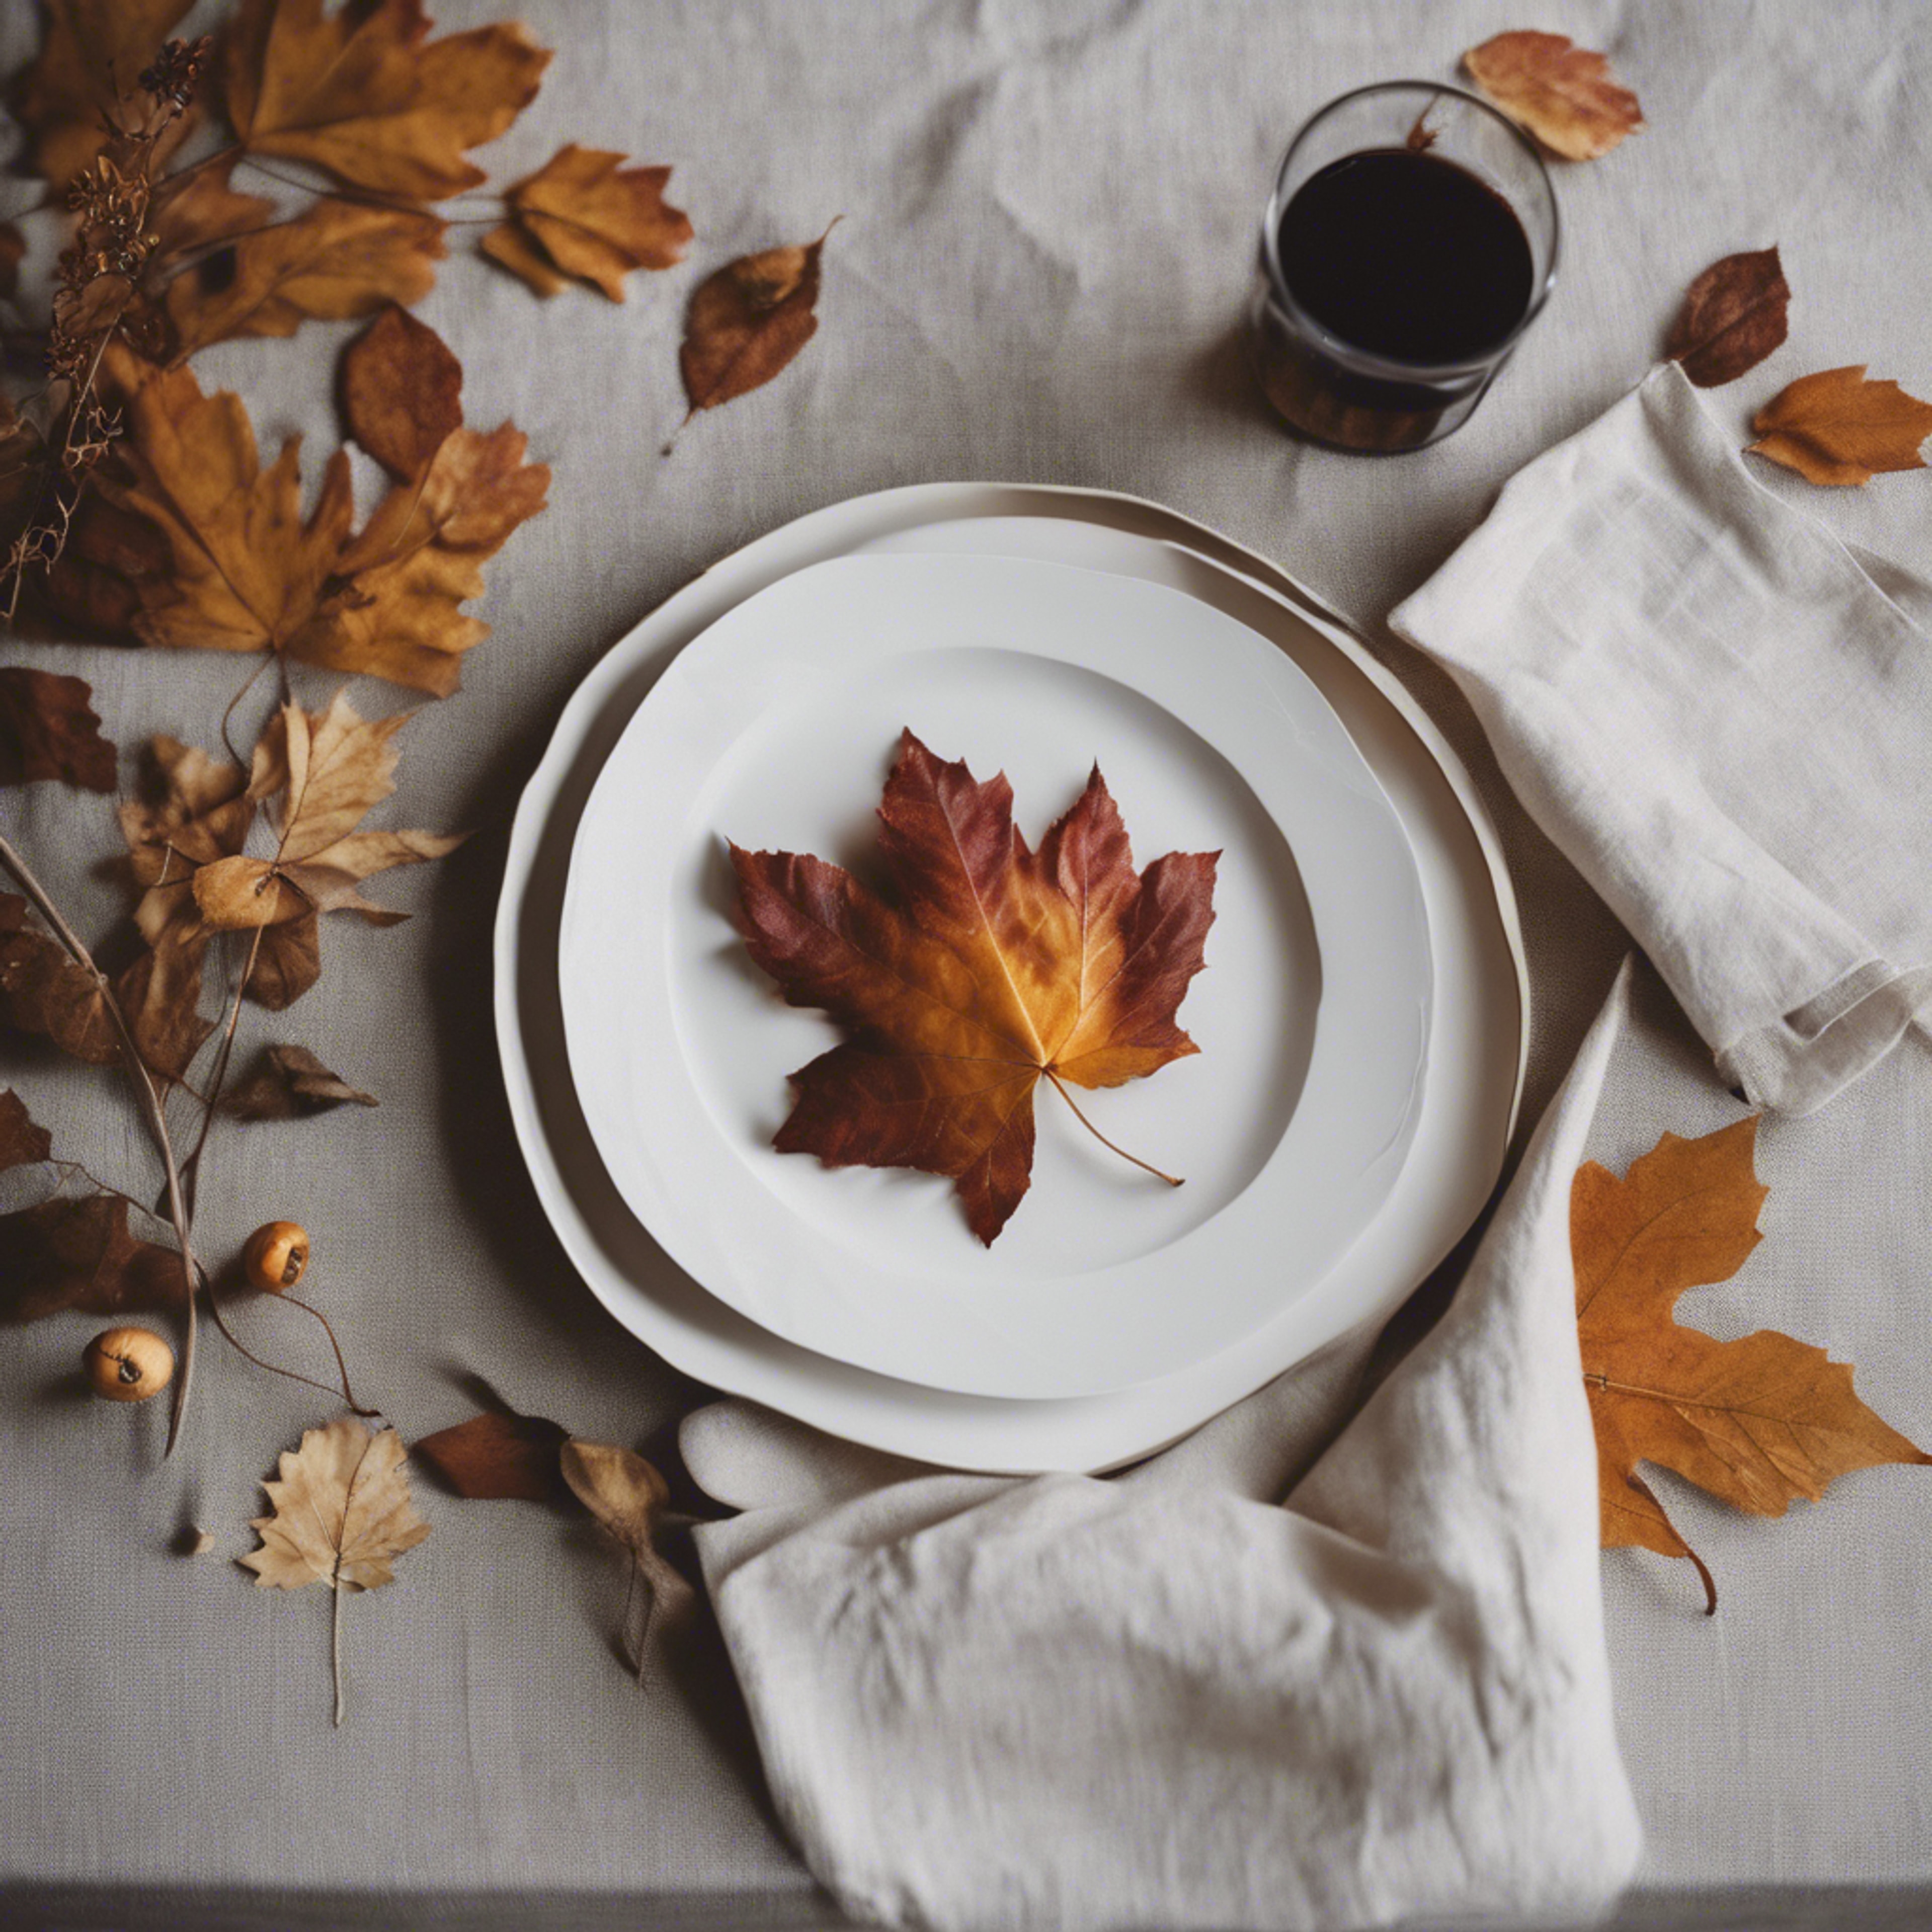 Simplicity-lover's Thanksgiving table decor with minimalistic white plates, natural linen napkins, and a few scattered autumn leaves. Обои[4fdd30c95e164a8e8309]